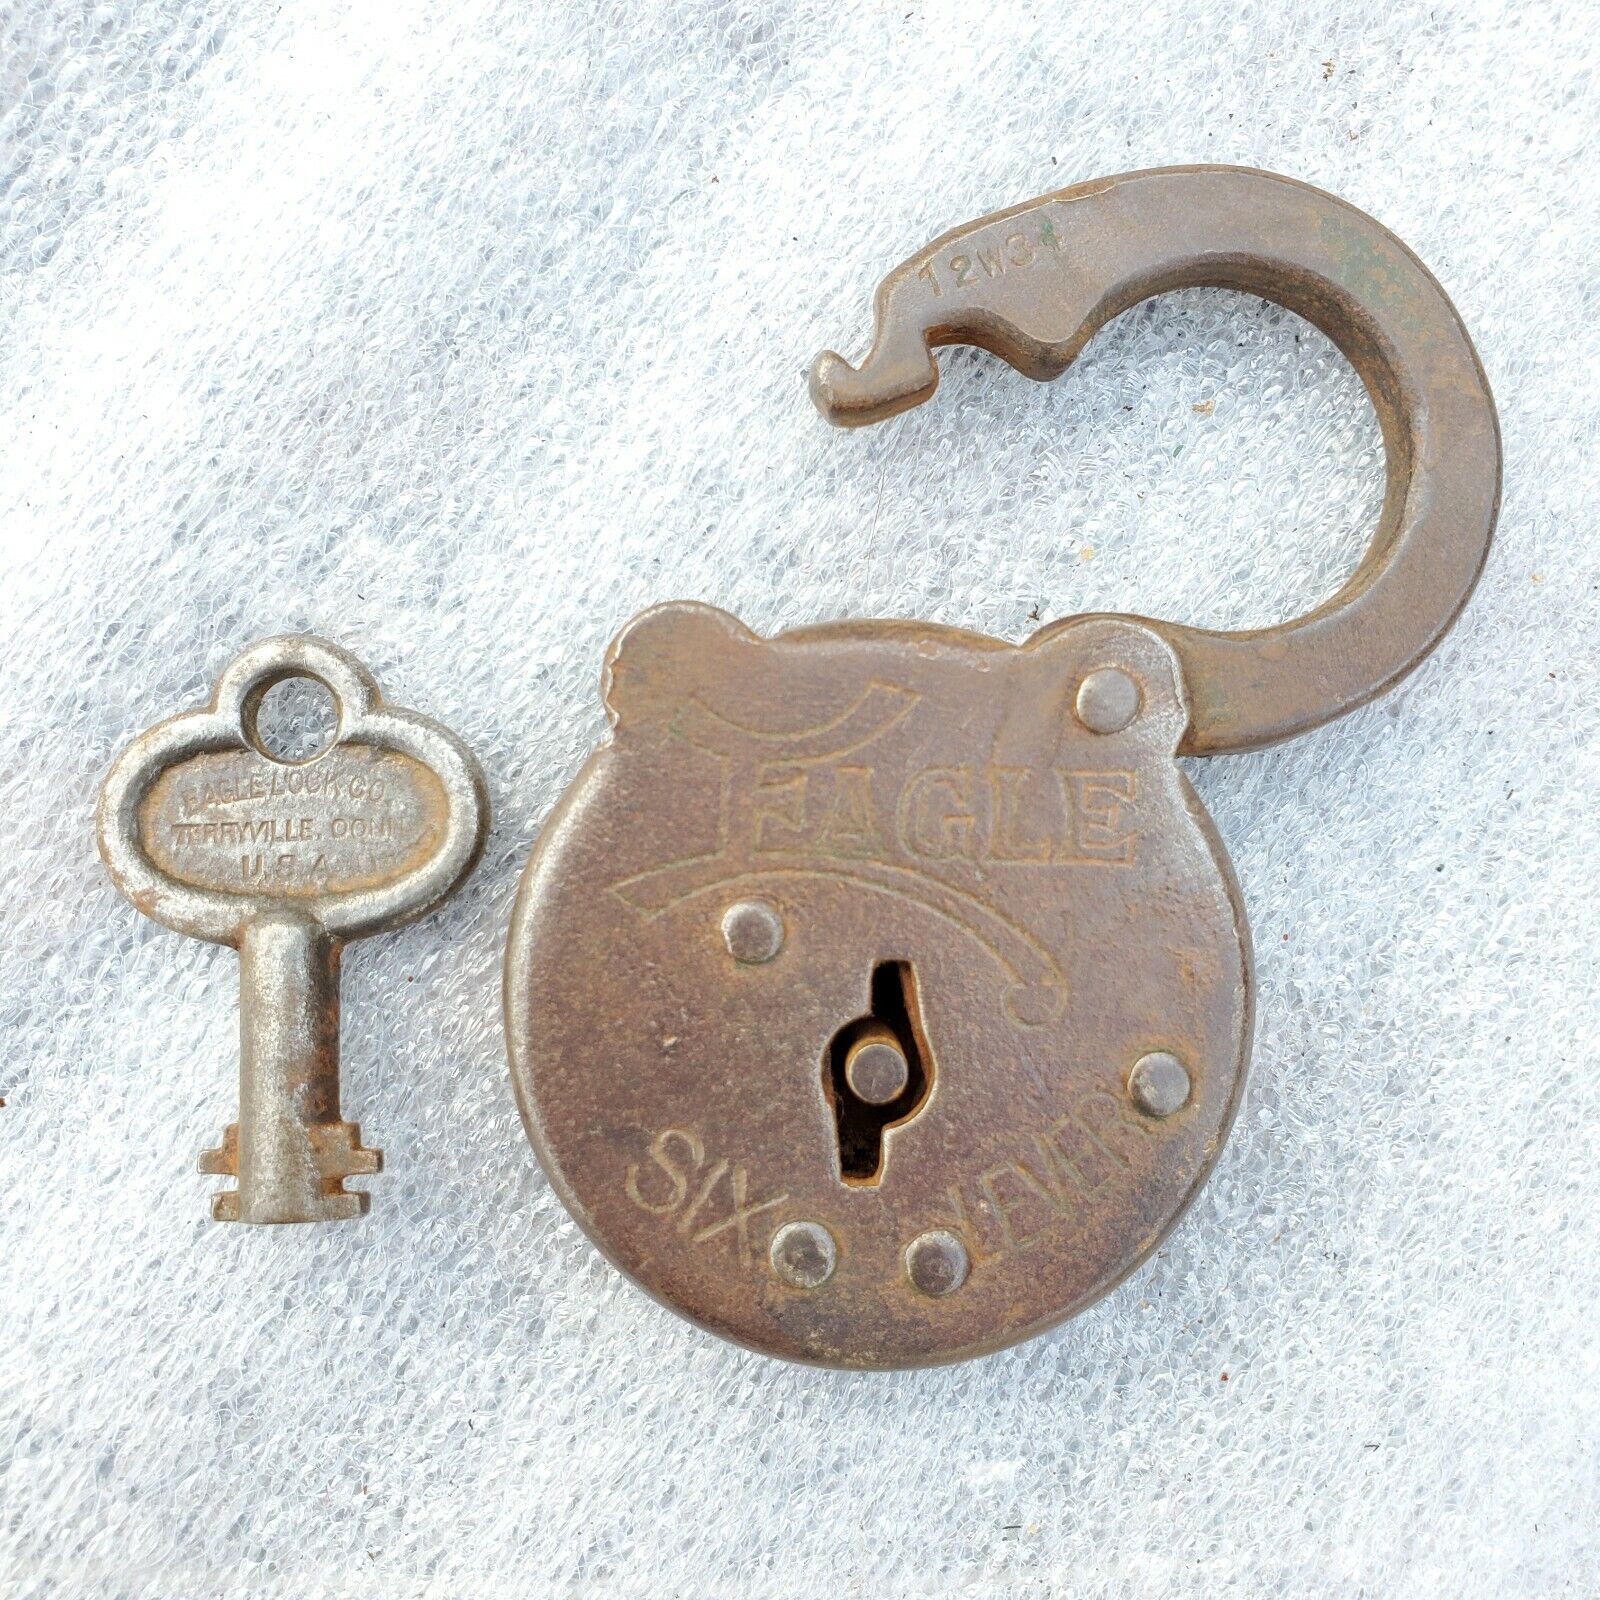 Antique Eagle Lock Company 6 Six Lever Padlock with working Key. 